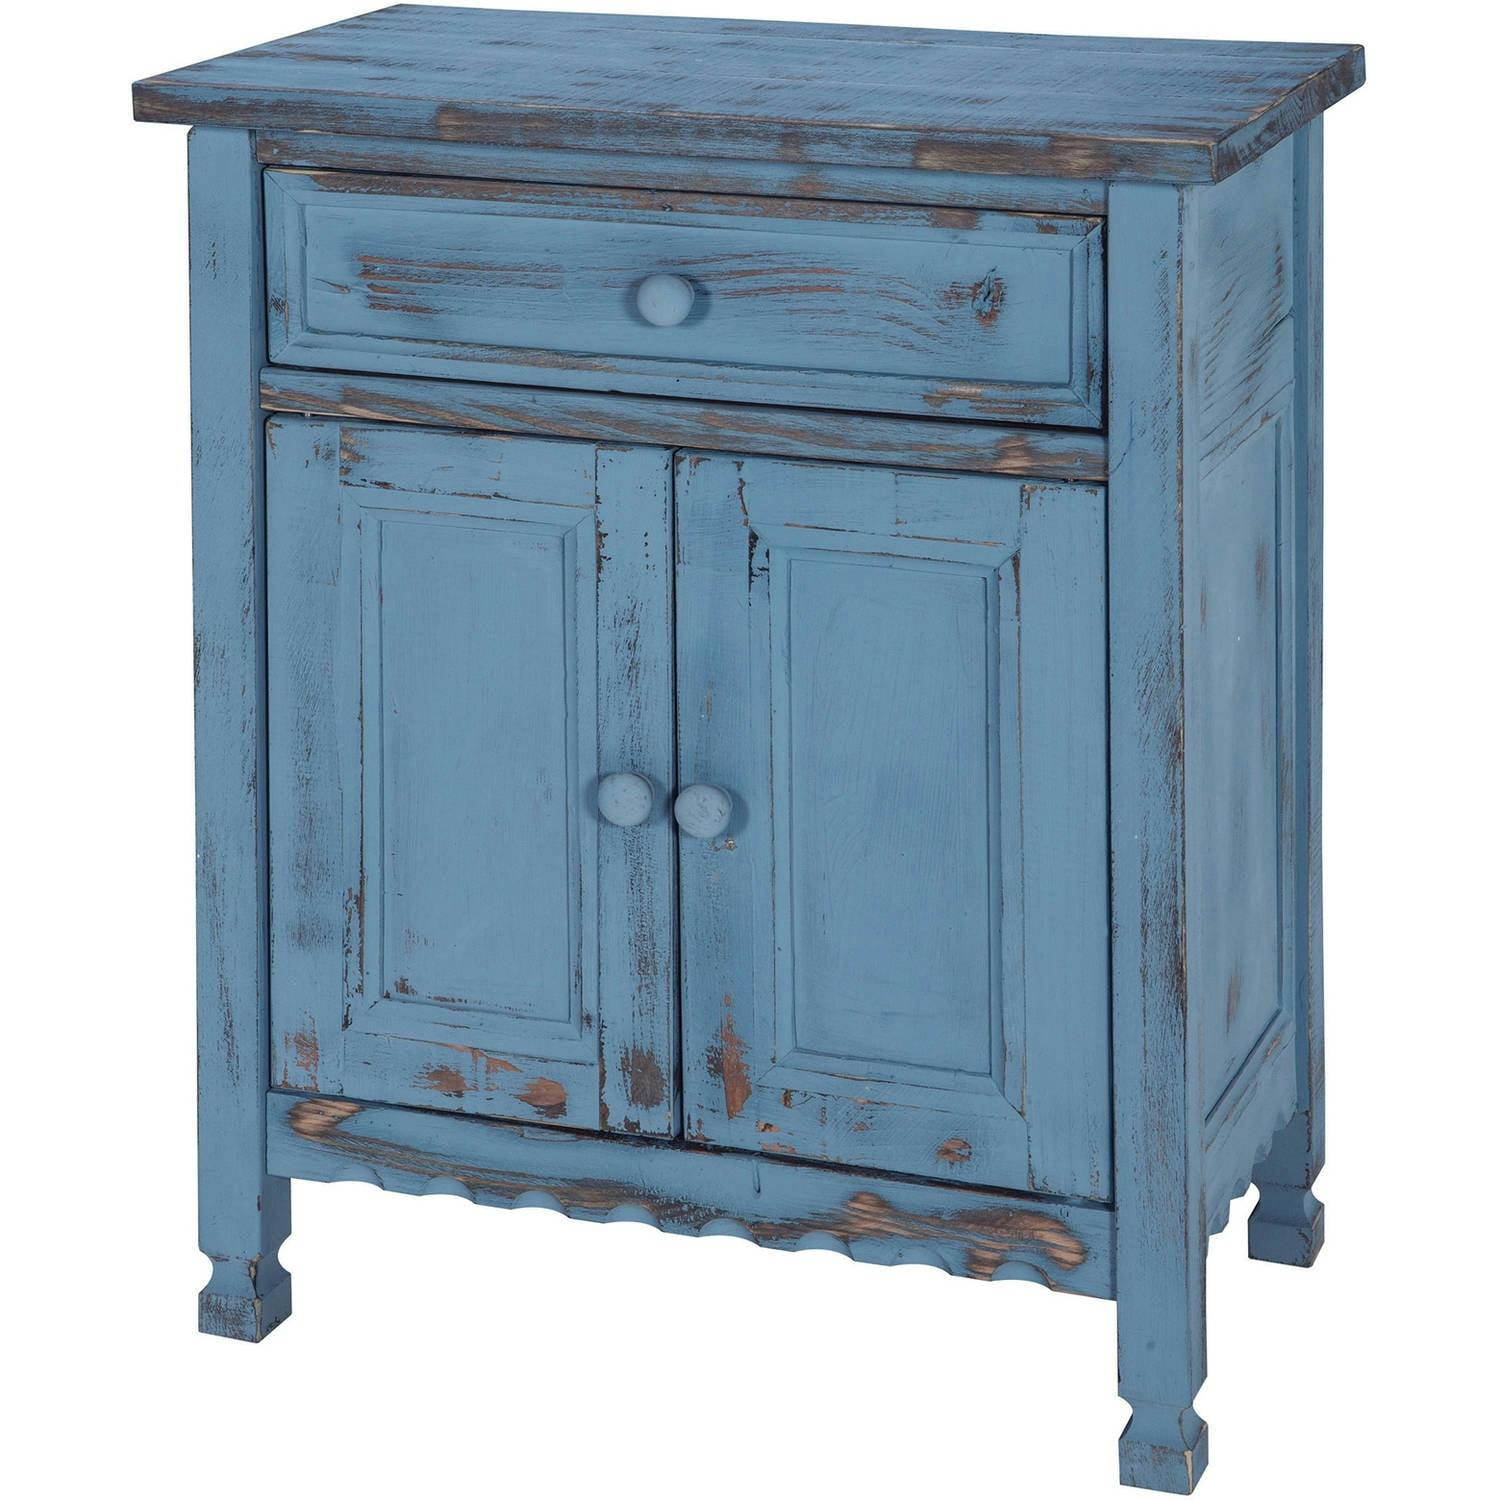 Charming Blue Antique Accent Cabinet with Adjustable Shelving